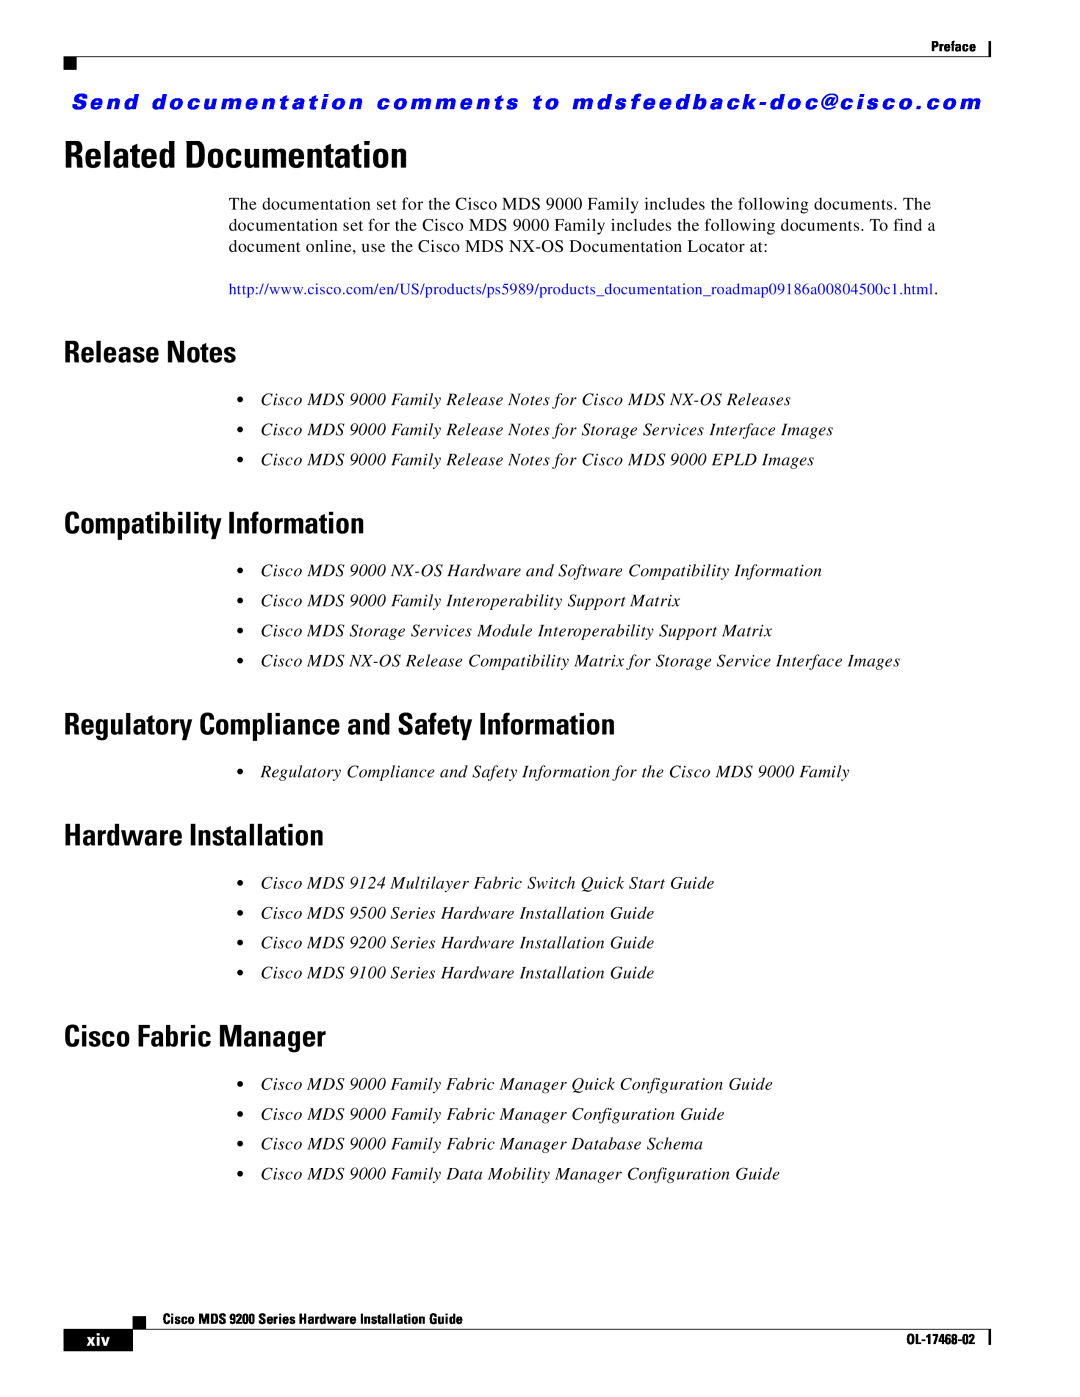 Cisco Systems MDS 9200 Series manual Related Documentation, Release Notes, Compatibility Information, Hardware Installation 